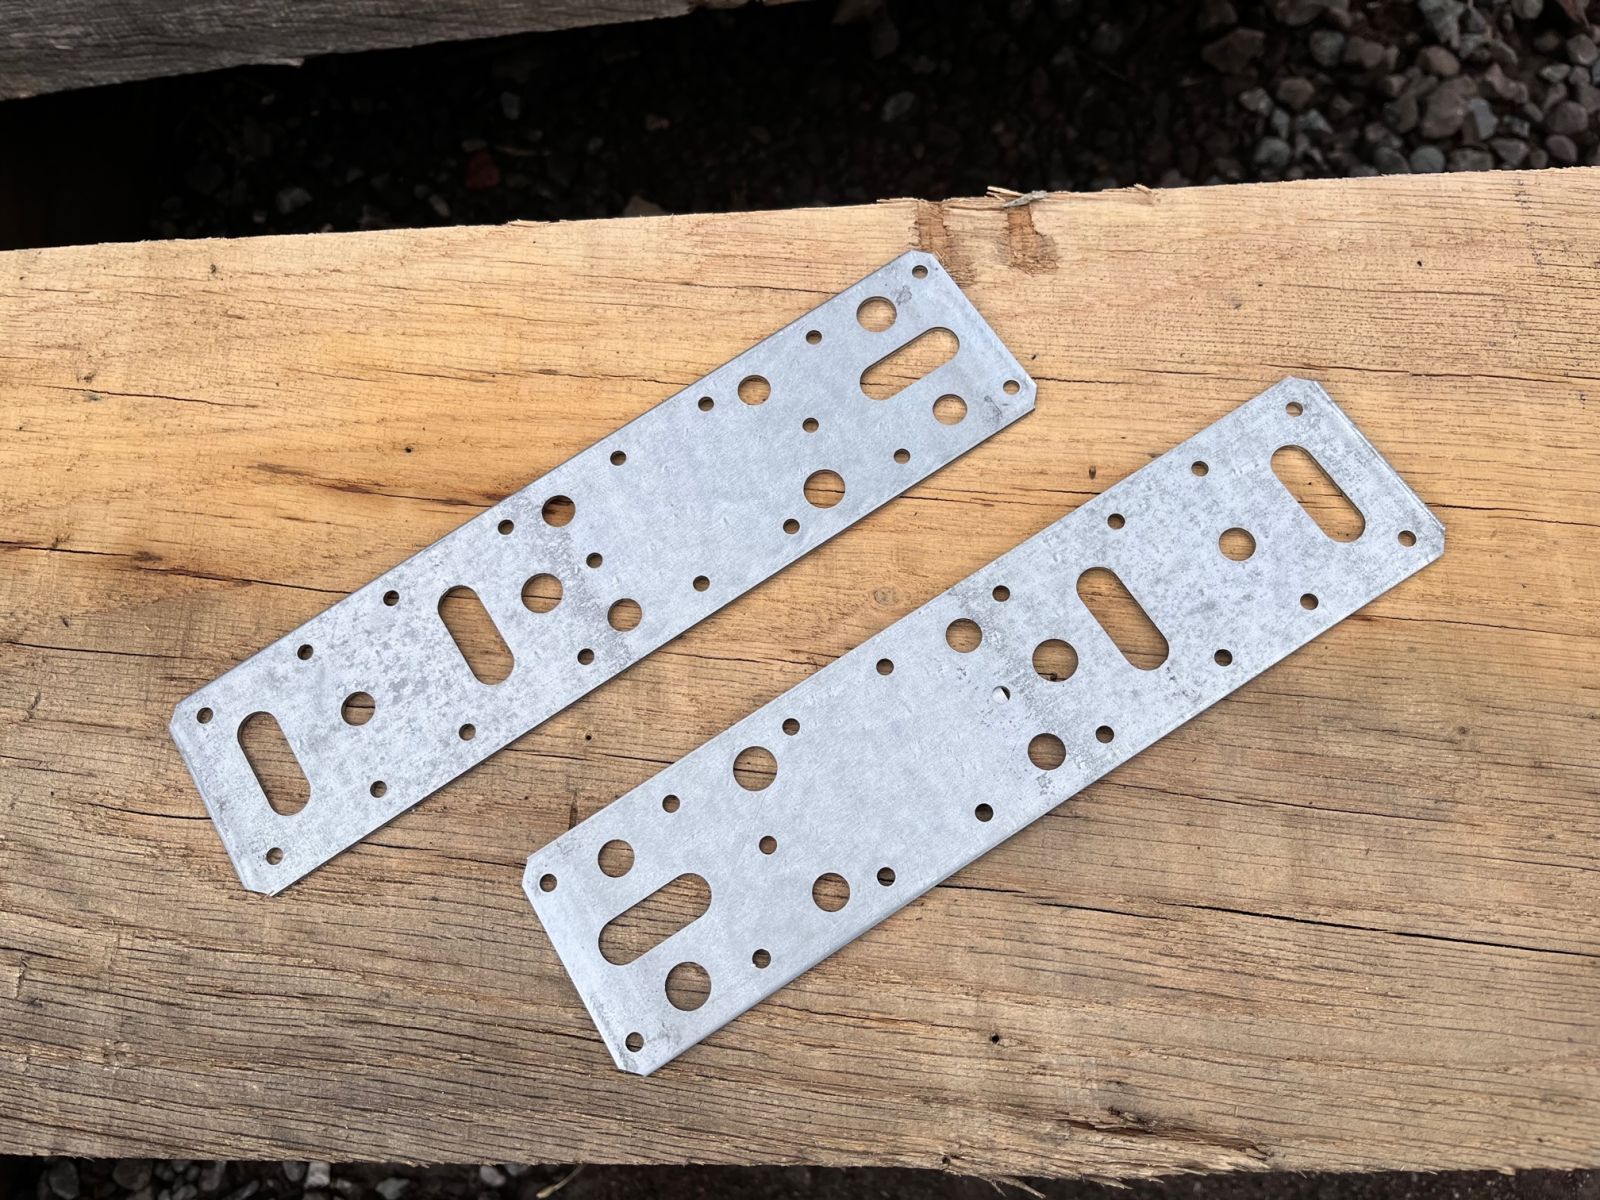 Steel flat connector plates used to join railway sleepers together